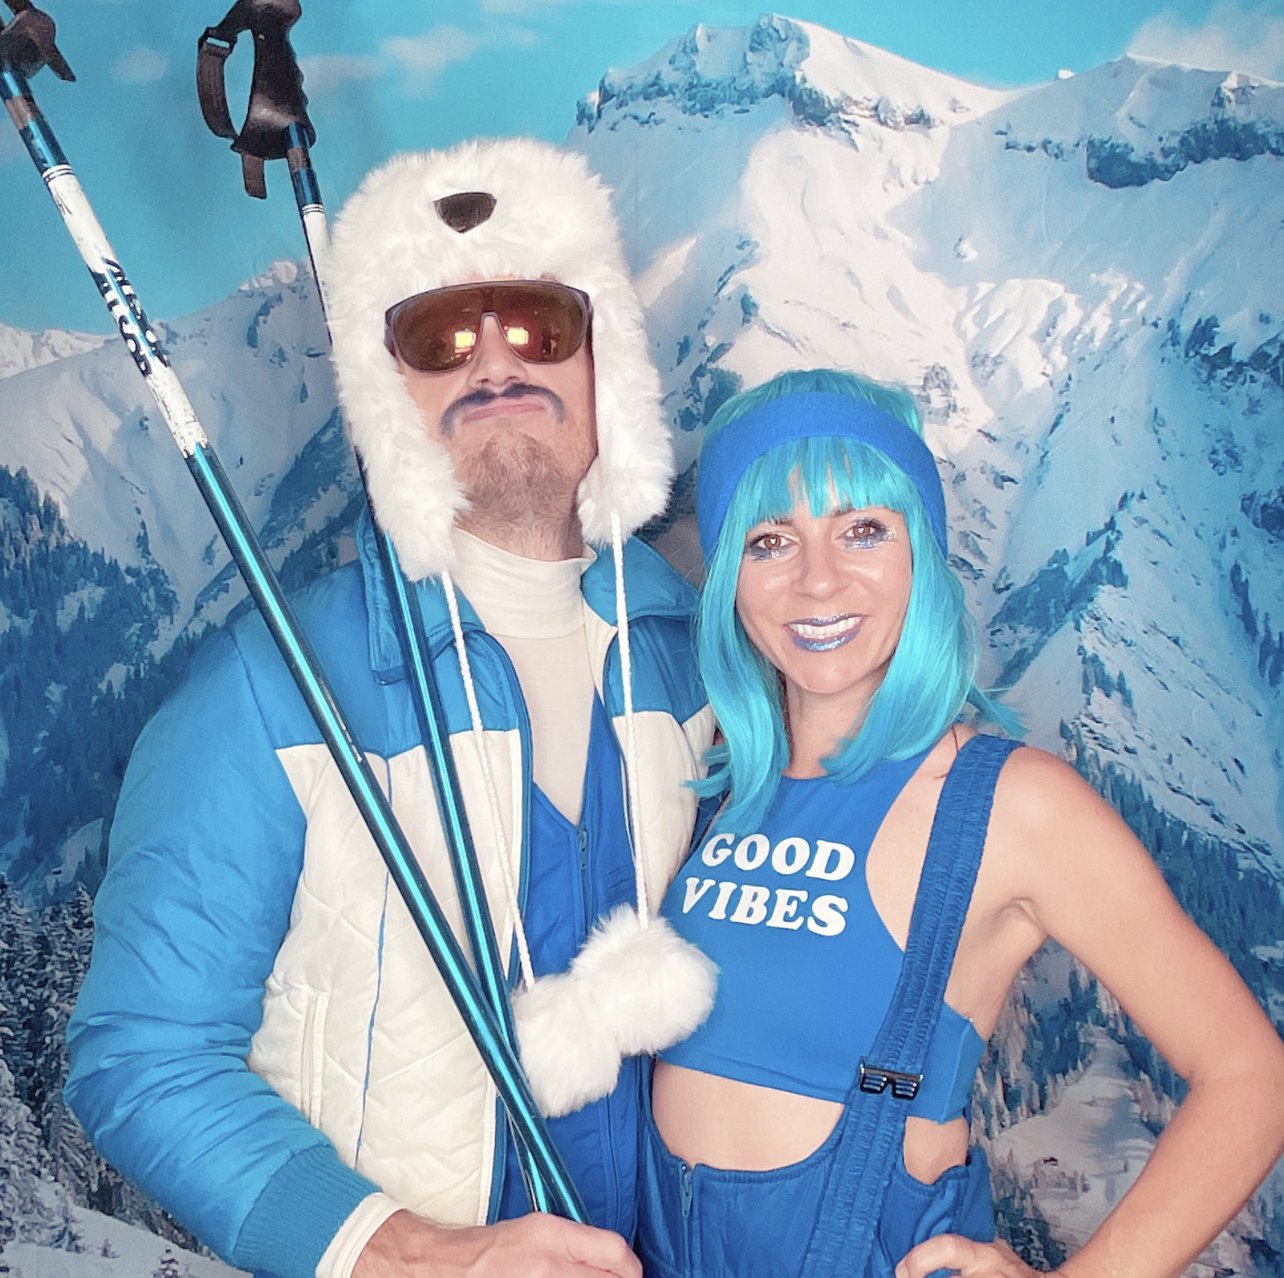 Apres Ski Photo Booth Rental For Winter Wonderland Themed Holiday Parties —  MISGIF Photo Booths